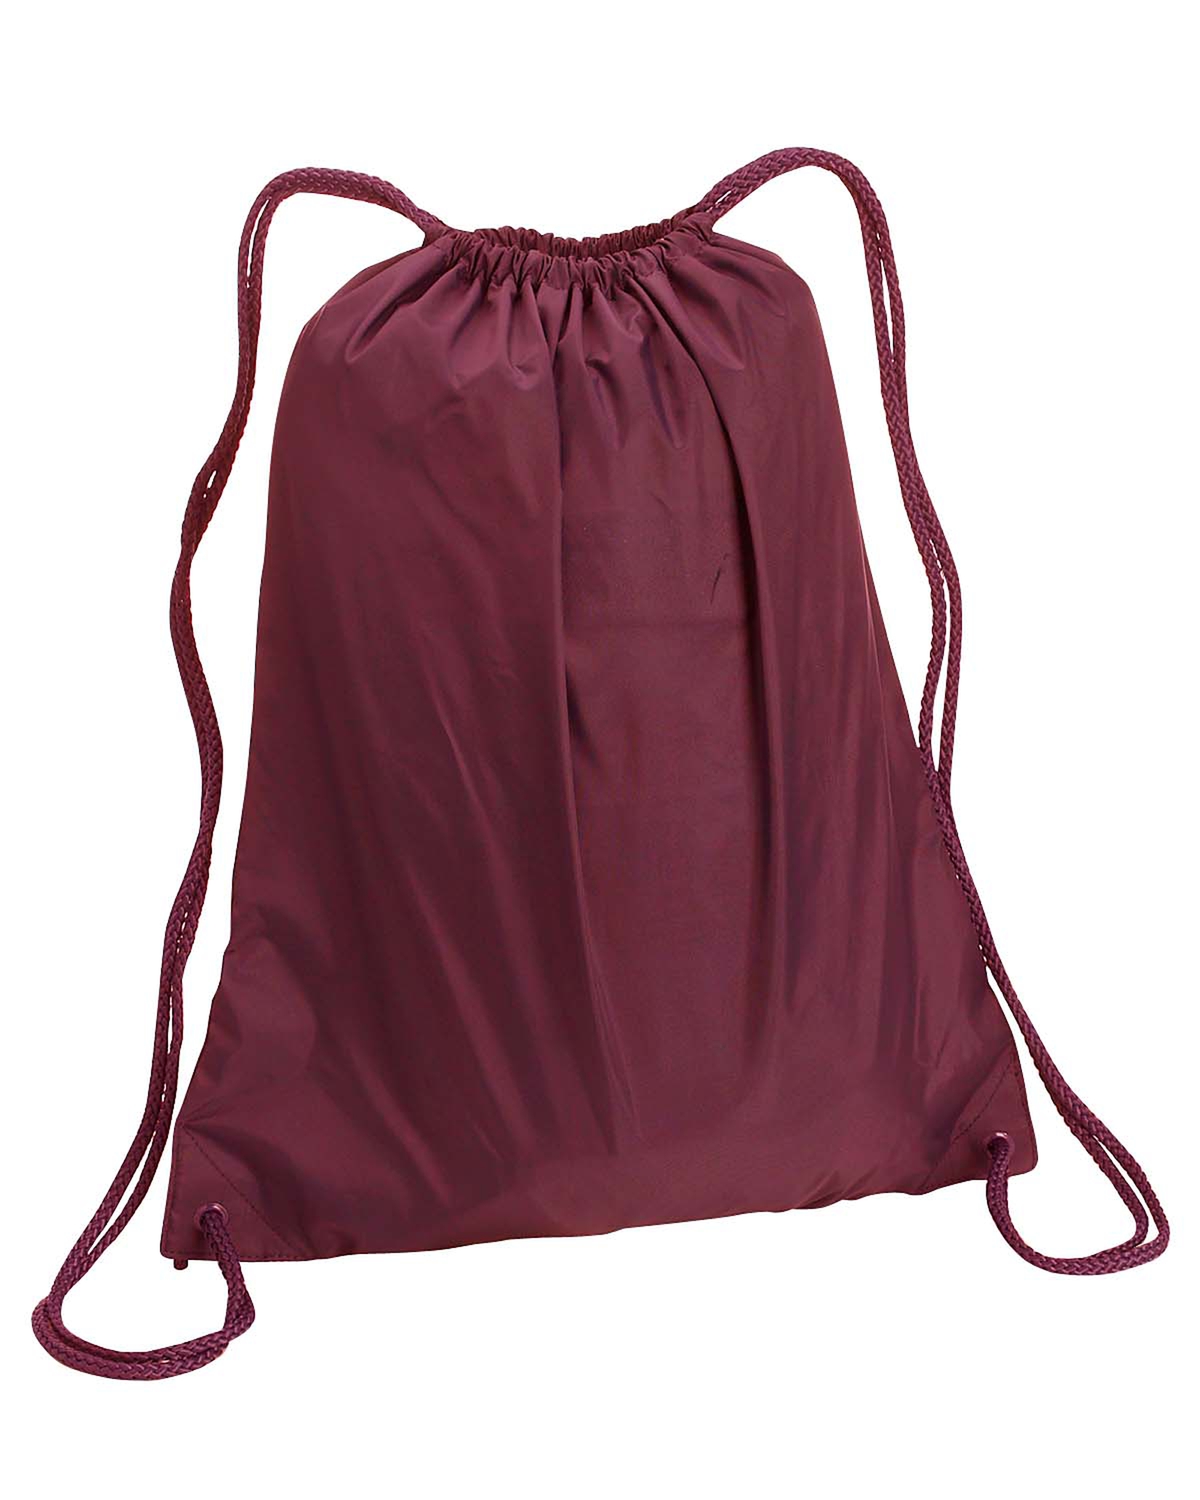 Quality Lightweight Large Drawstring Backpack Bag, One Size, Maroon - image 1 of 3